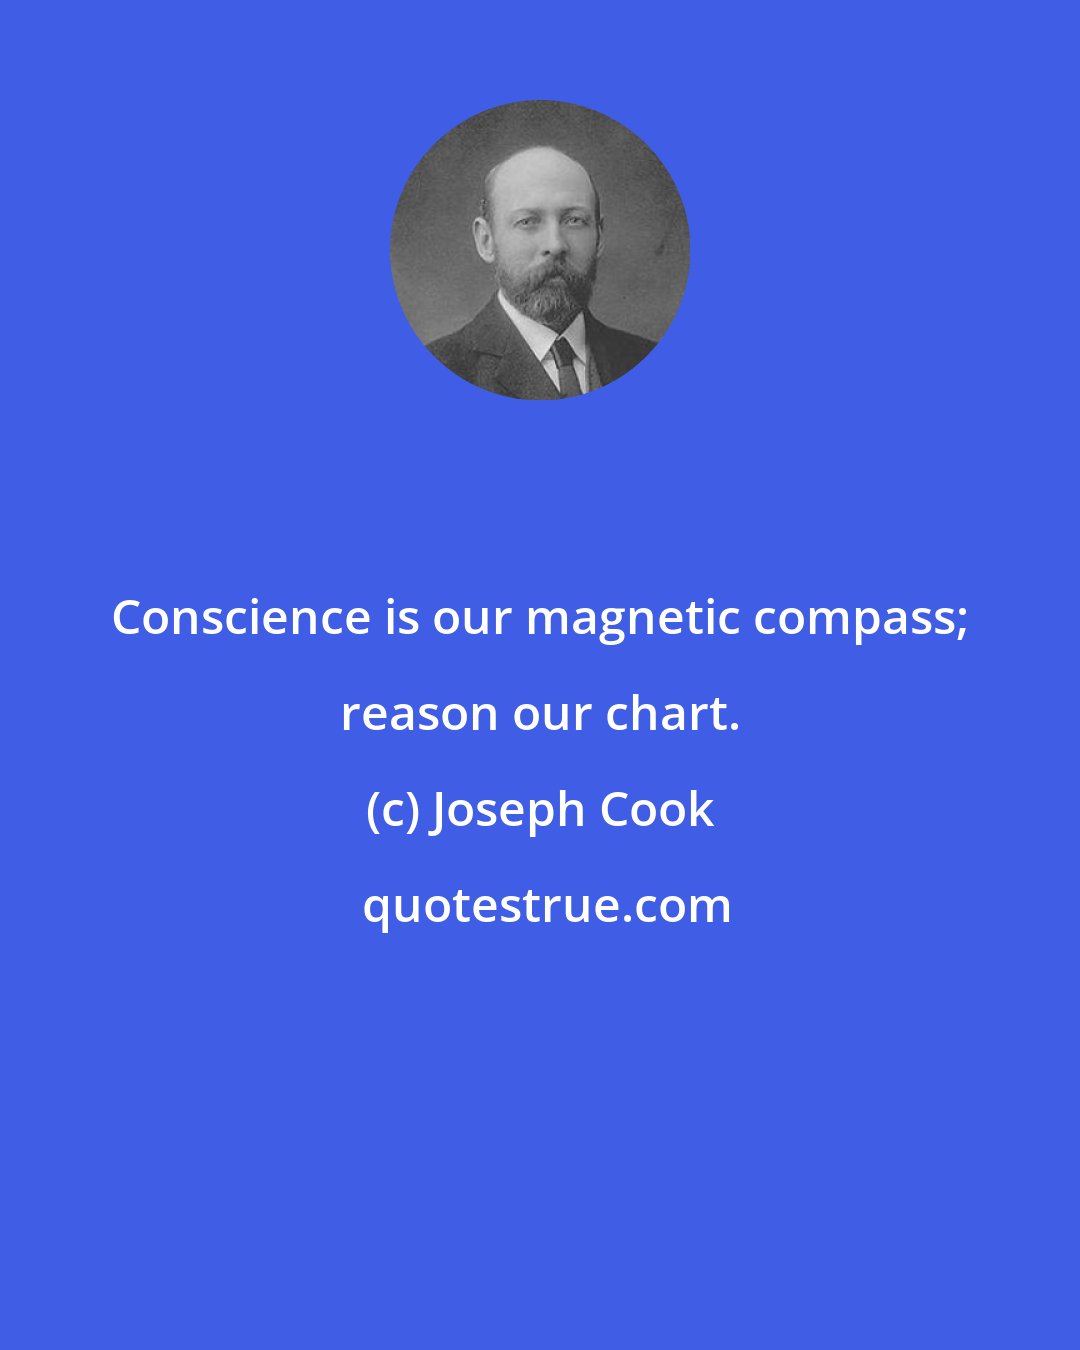 Joseph Cook: Conscience is our magnetic compass; reason our chart.